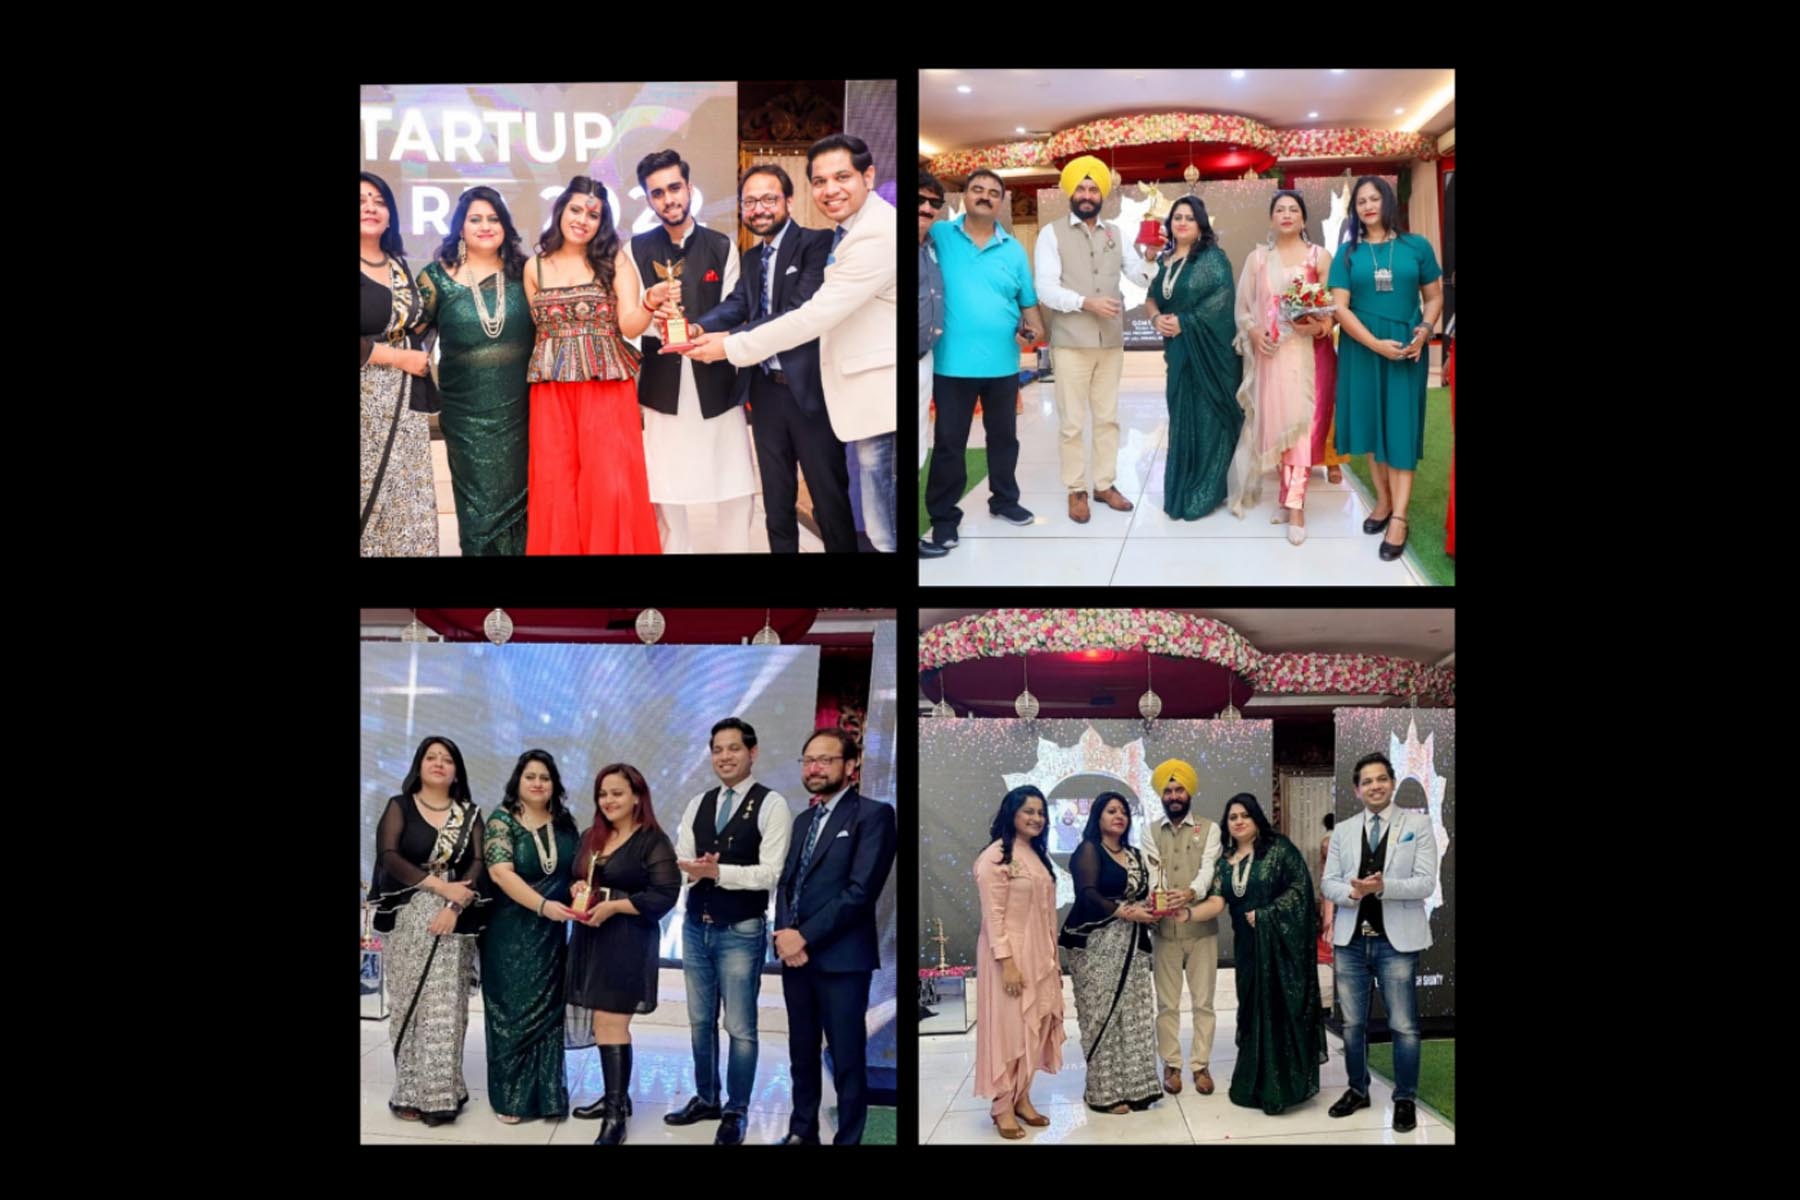 It was a fun event with renowned guests and amazing activities says Seema Bali organiser of Teej Rakhi Carnival & StartUp Awards